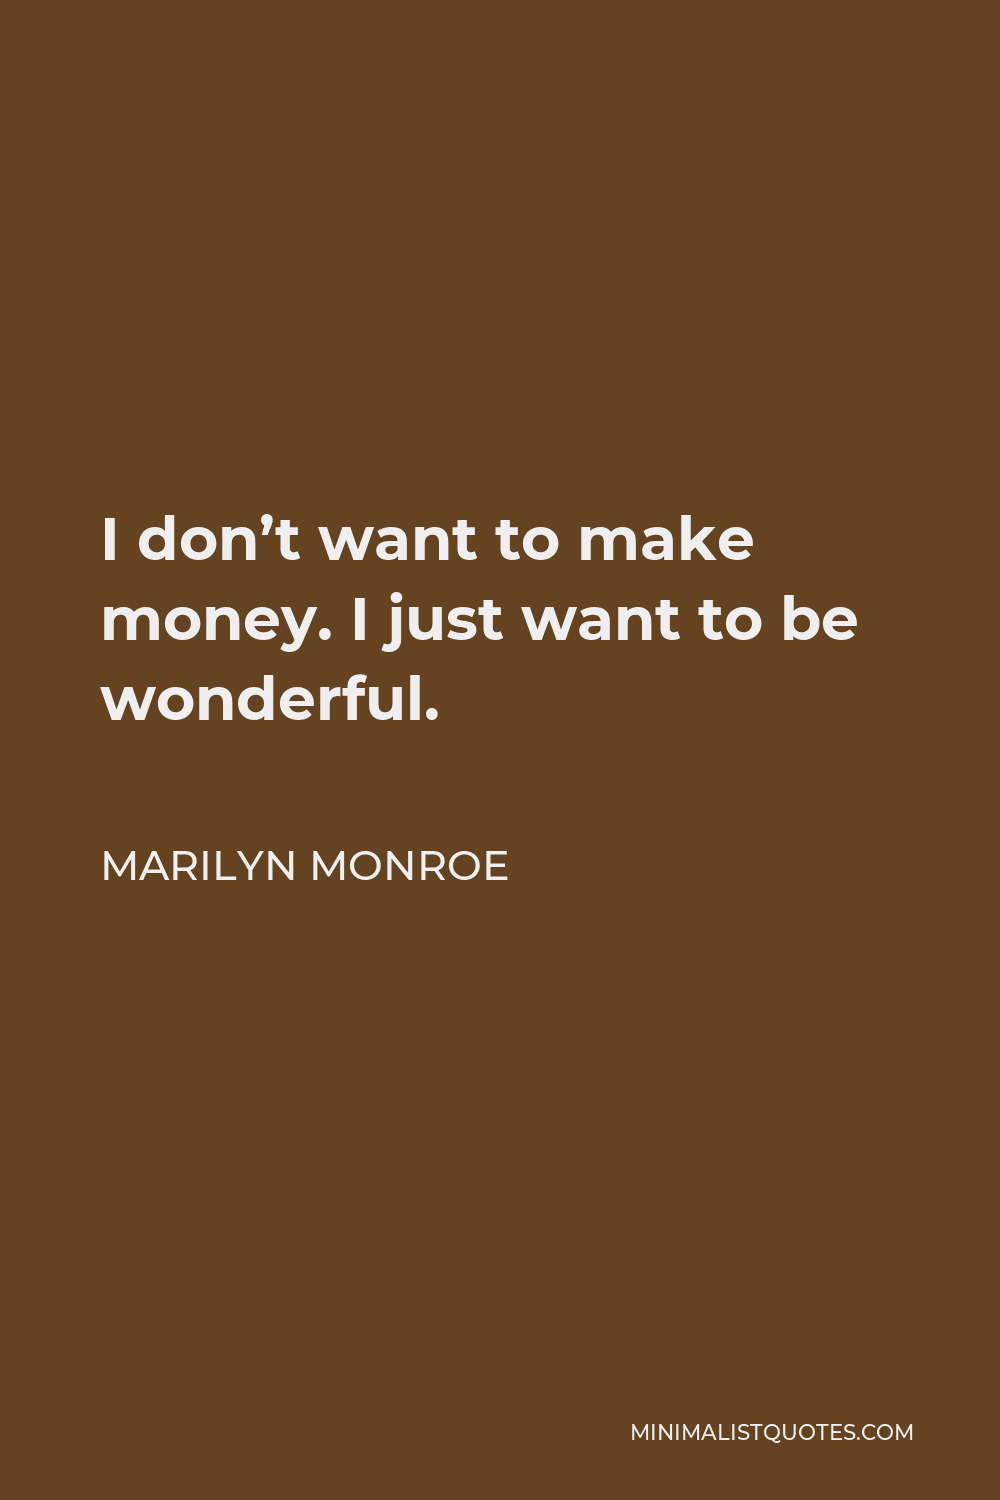 Marilyn Monroe Quote - I don’t want to make money. I just want to be wonderful.